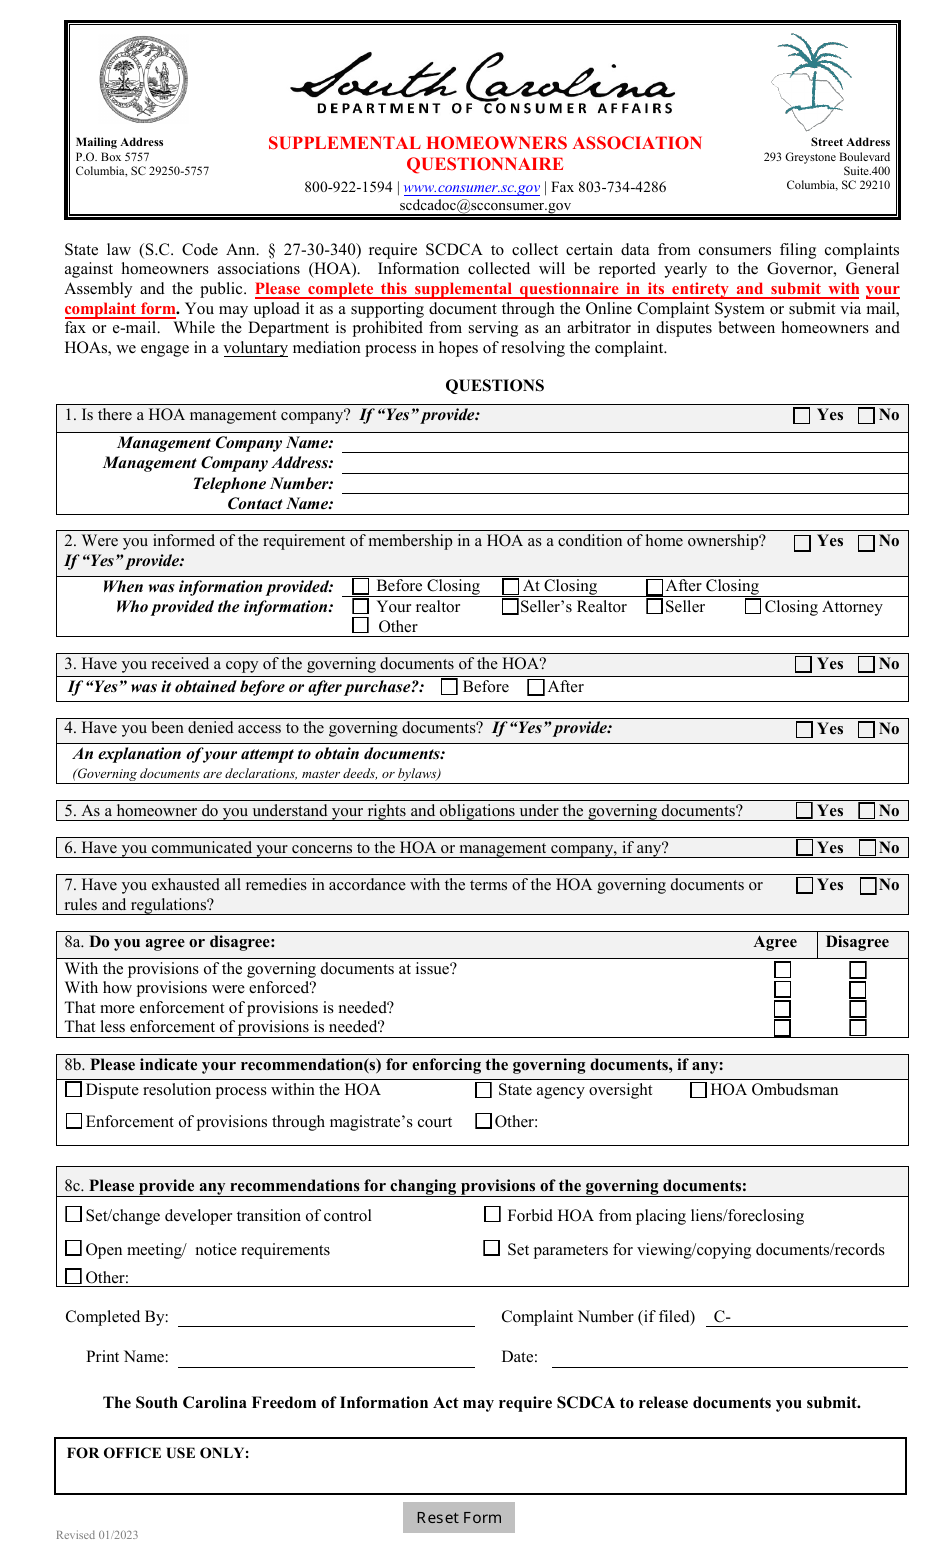 Supplemental Homeowners Association Questionnaire - South Carolina, Page 1